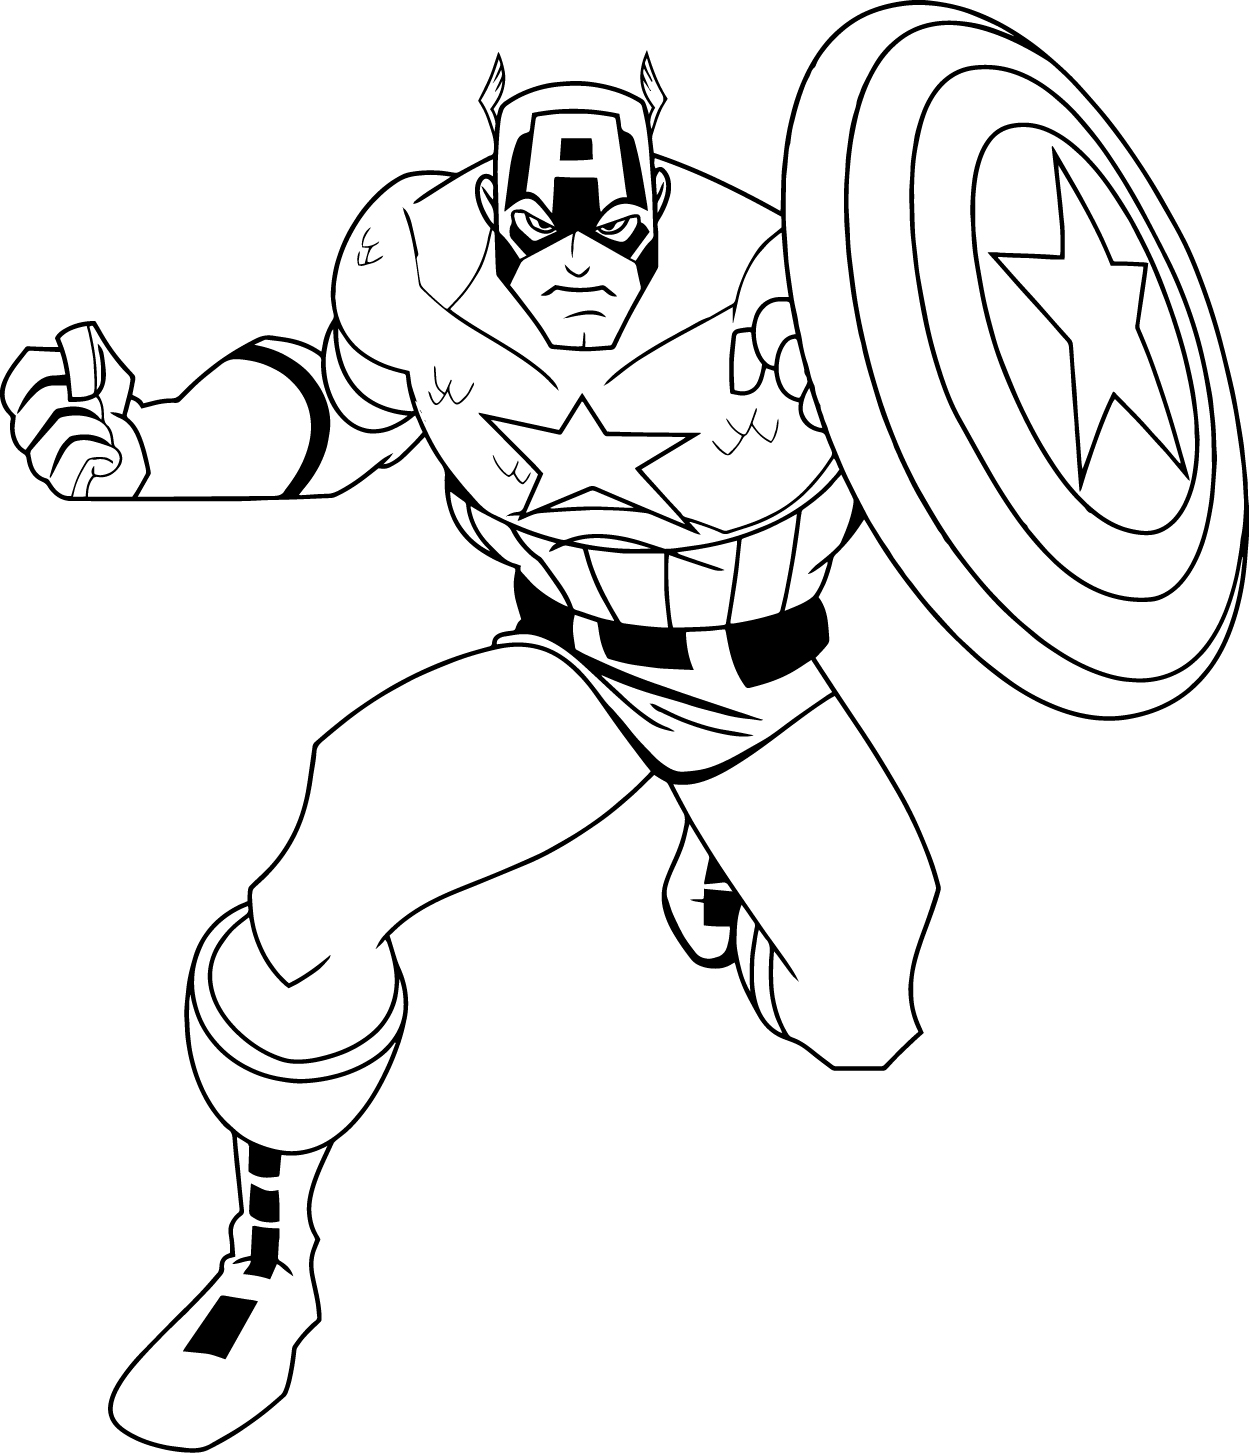 captain america colouring pictures free printable captain america coloring pages for kids captain america colouring pictures 